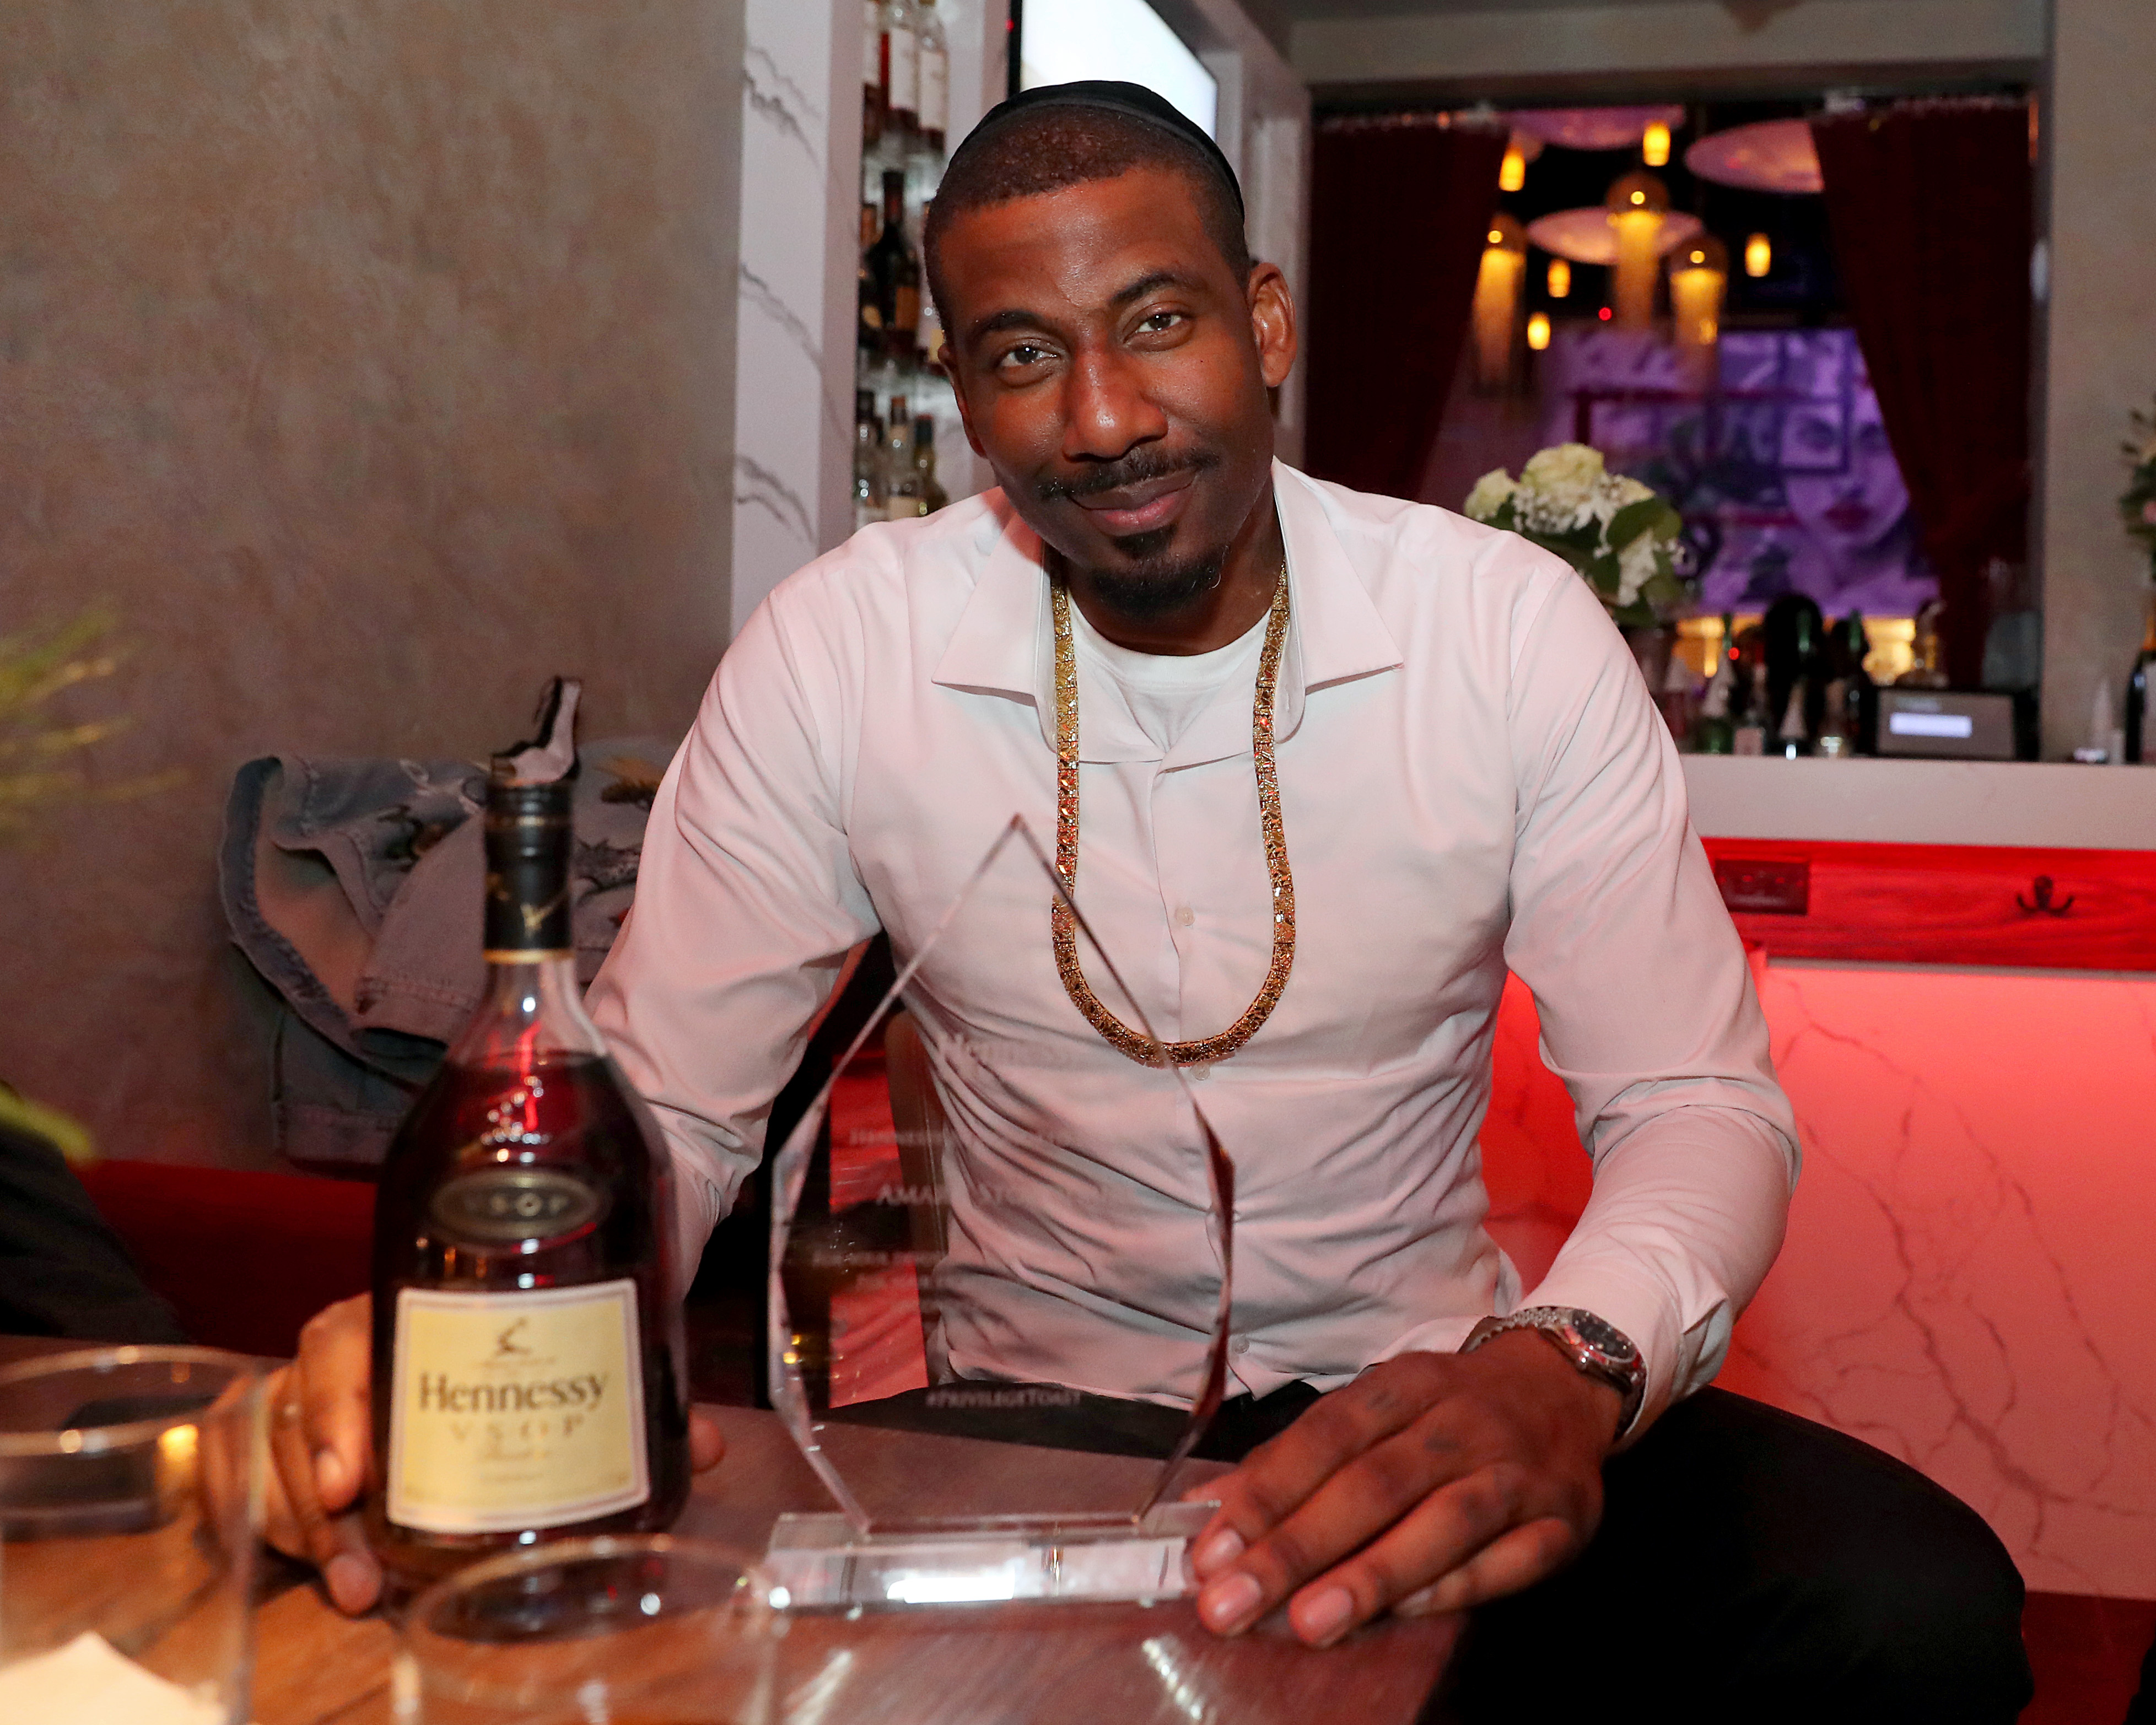 NBA Star Amar’e Stoudemire Just Added $3.5 Million to His Bank Account Thanks to Rapper Rick Ross